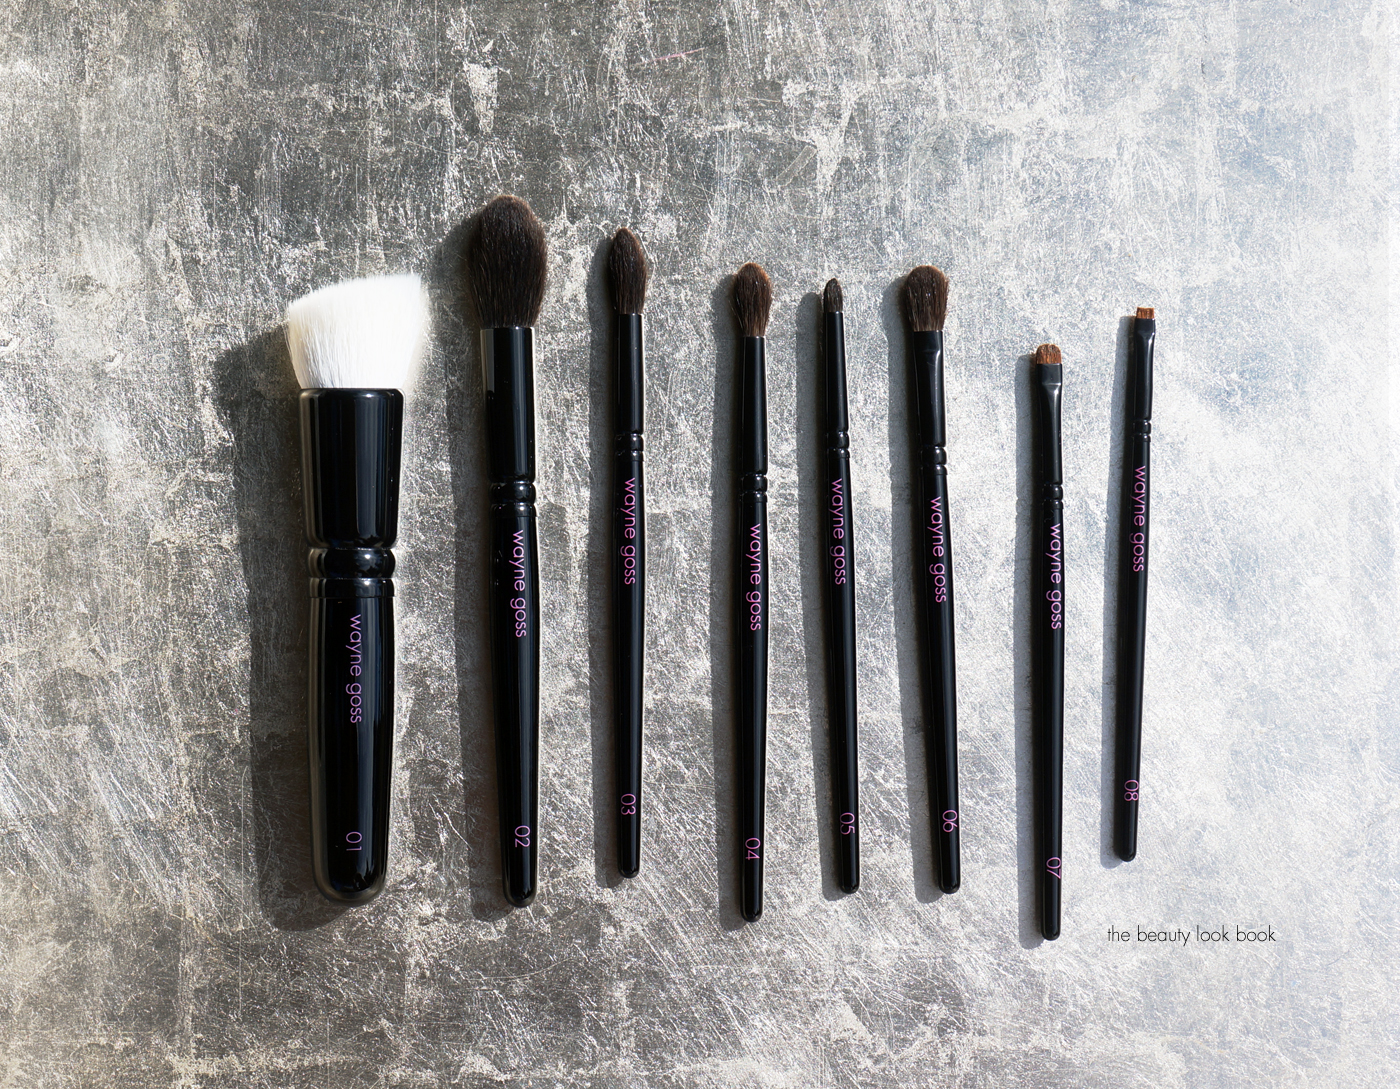 Chanel Makeup Brushes Old vs New Version, The Beauty Look Book